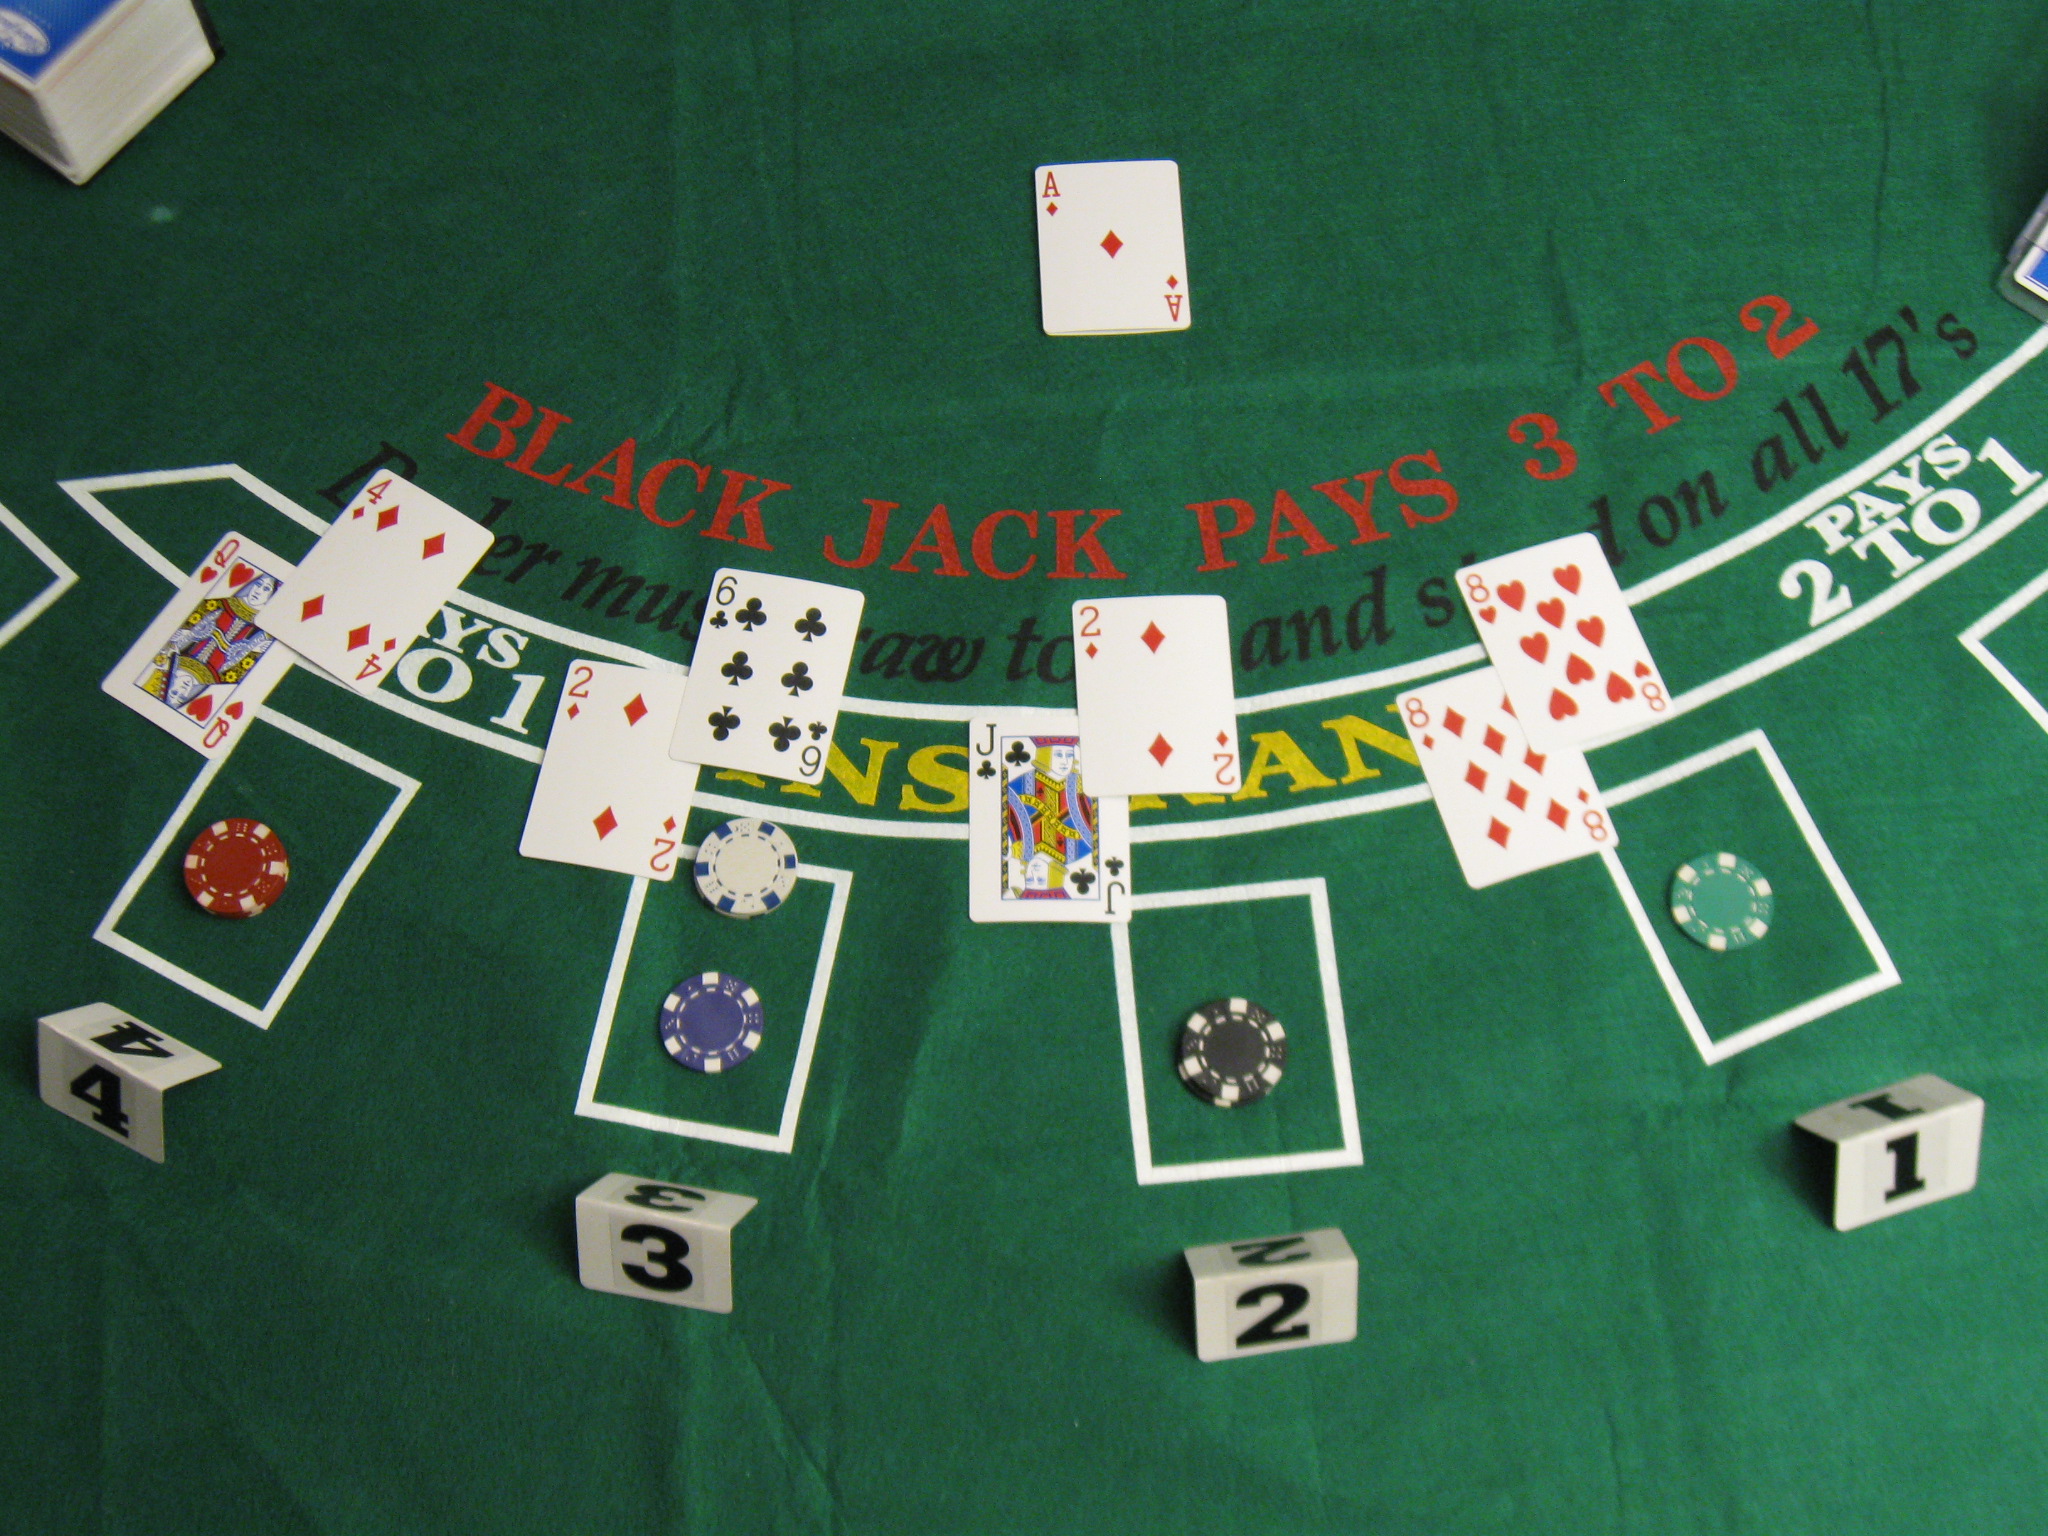  how to play blackjack casino rules 